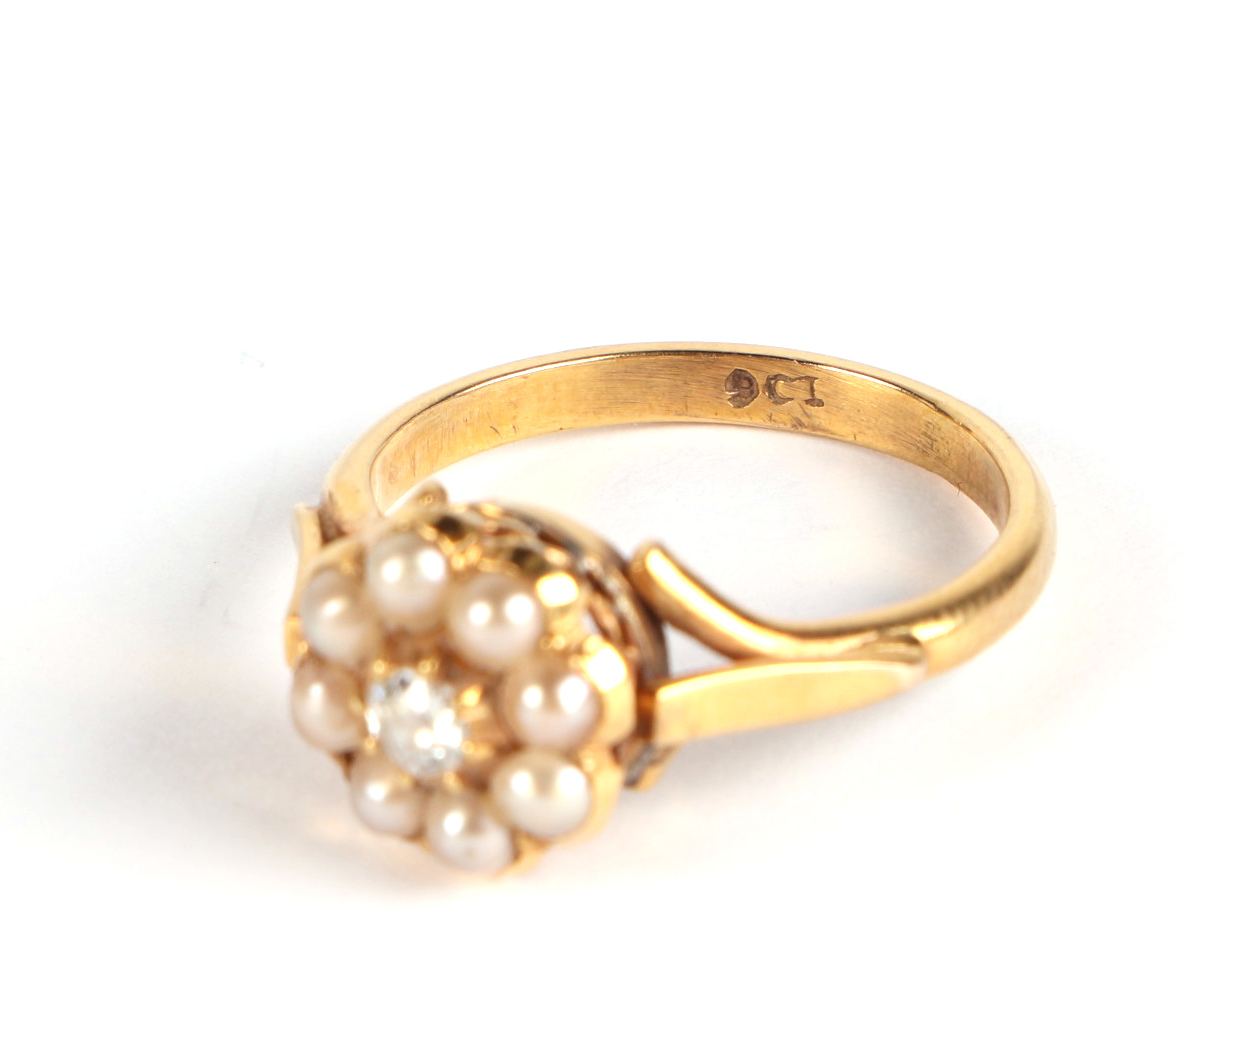 An antique 9ct gold seed pearl and diamond ring, 2.9g, approx. UK size L - Image 5 of 5